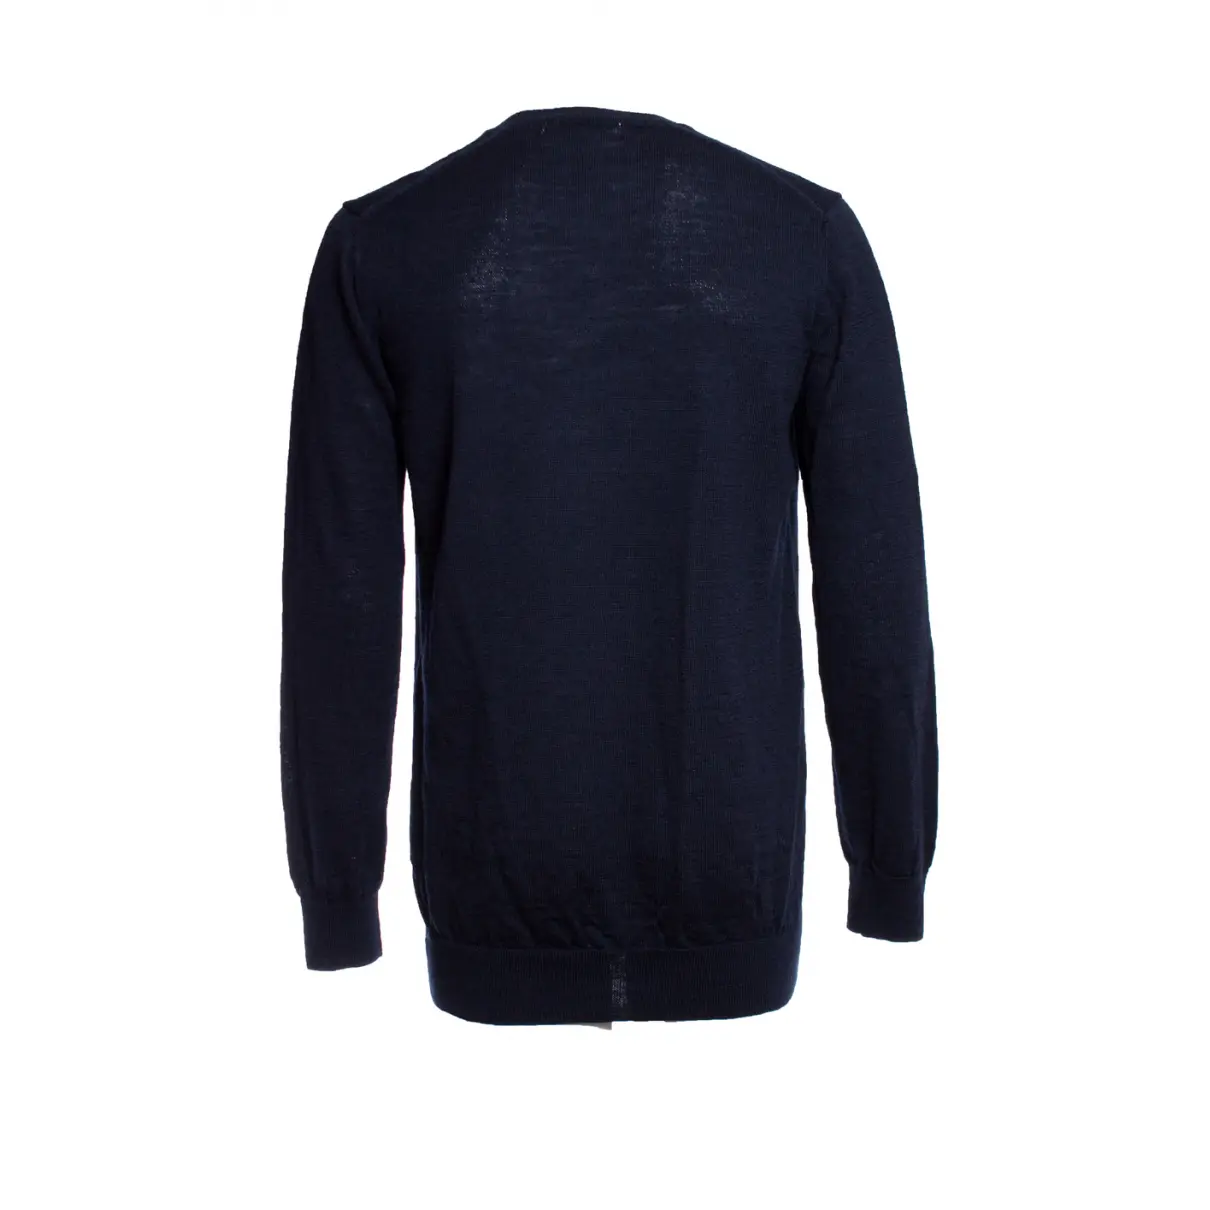 Buy Comme Des Garcons Wool pull online